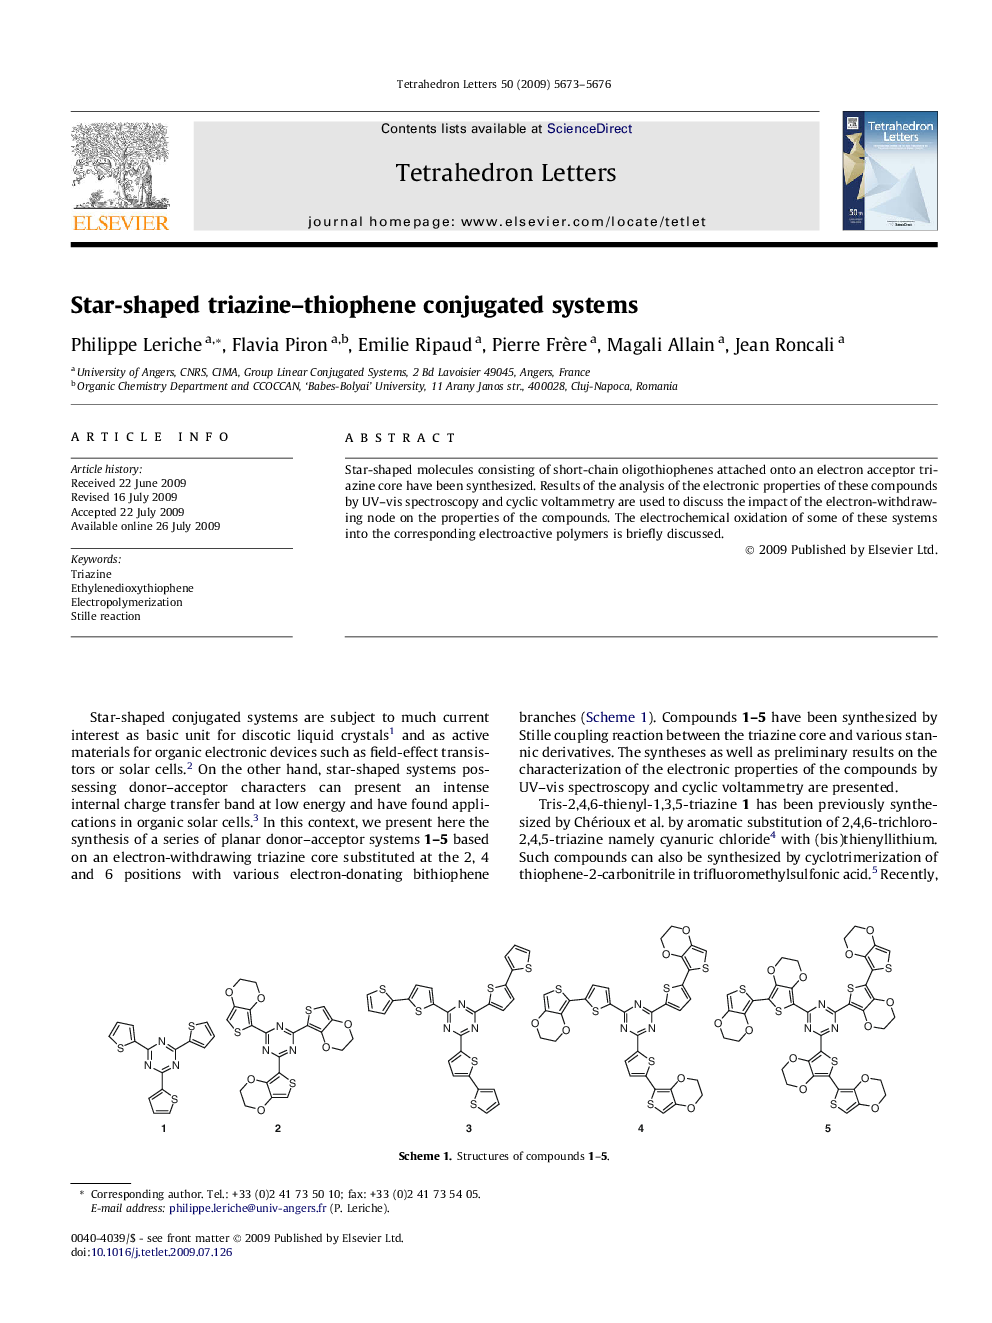 Star-shaped triazine-thiophene conjugated systems